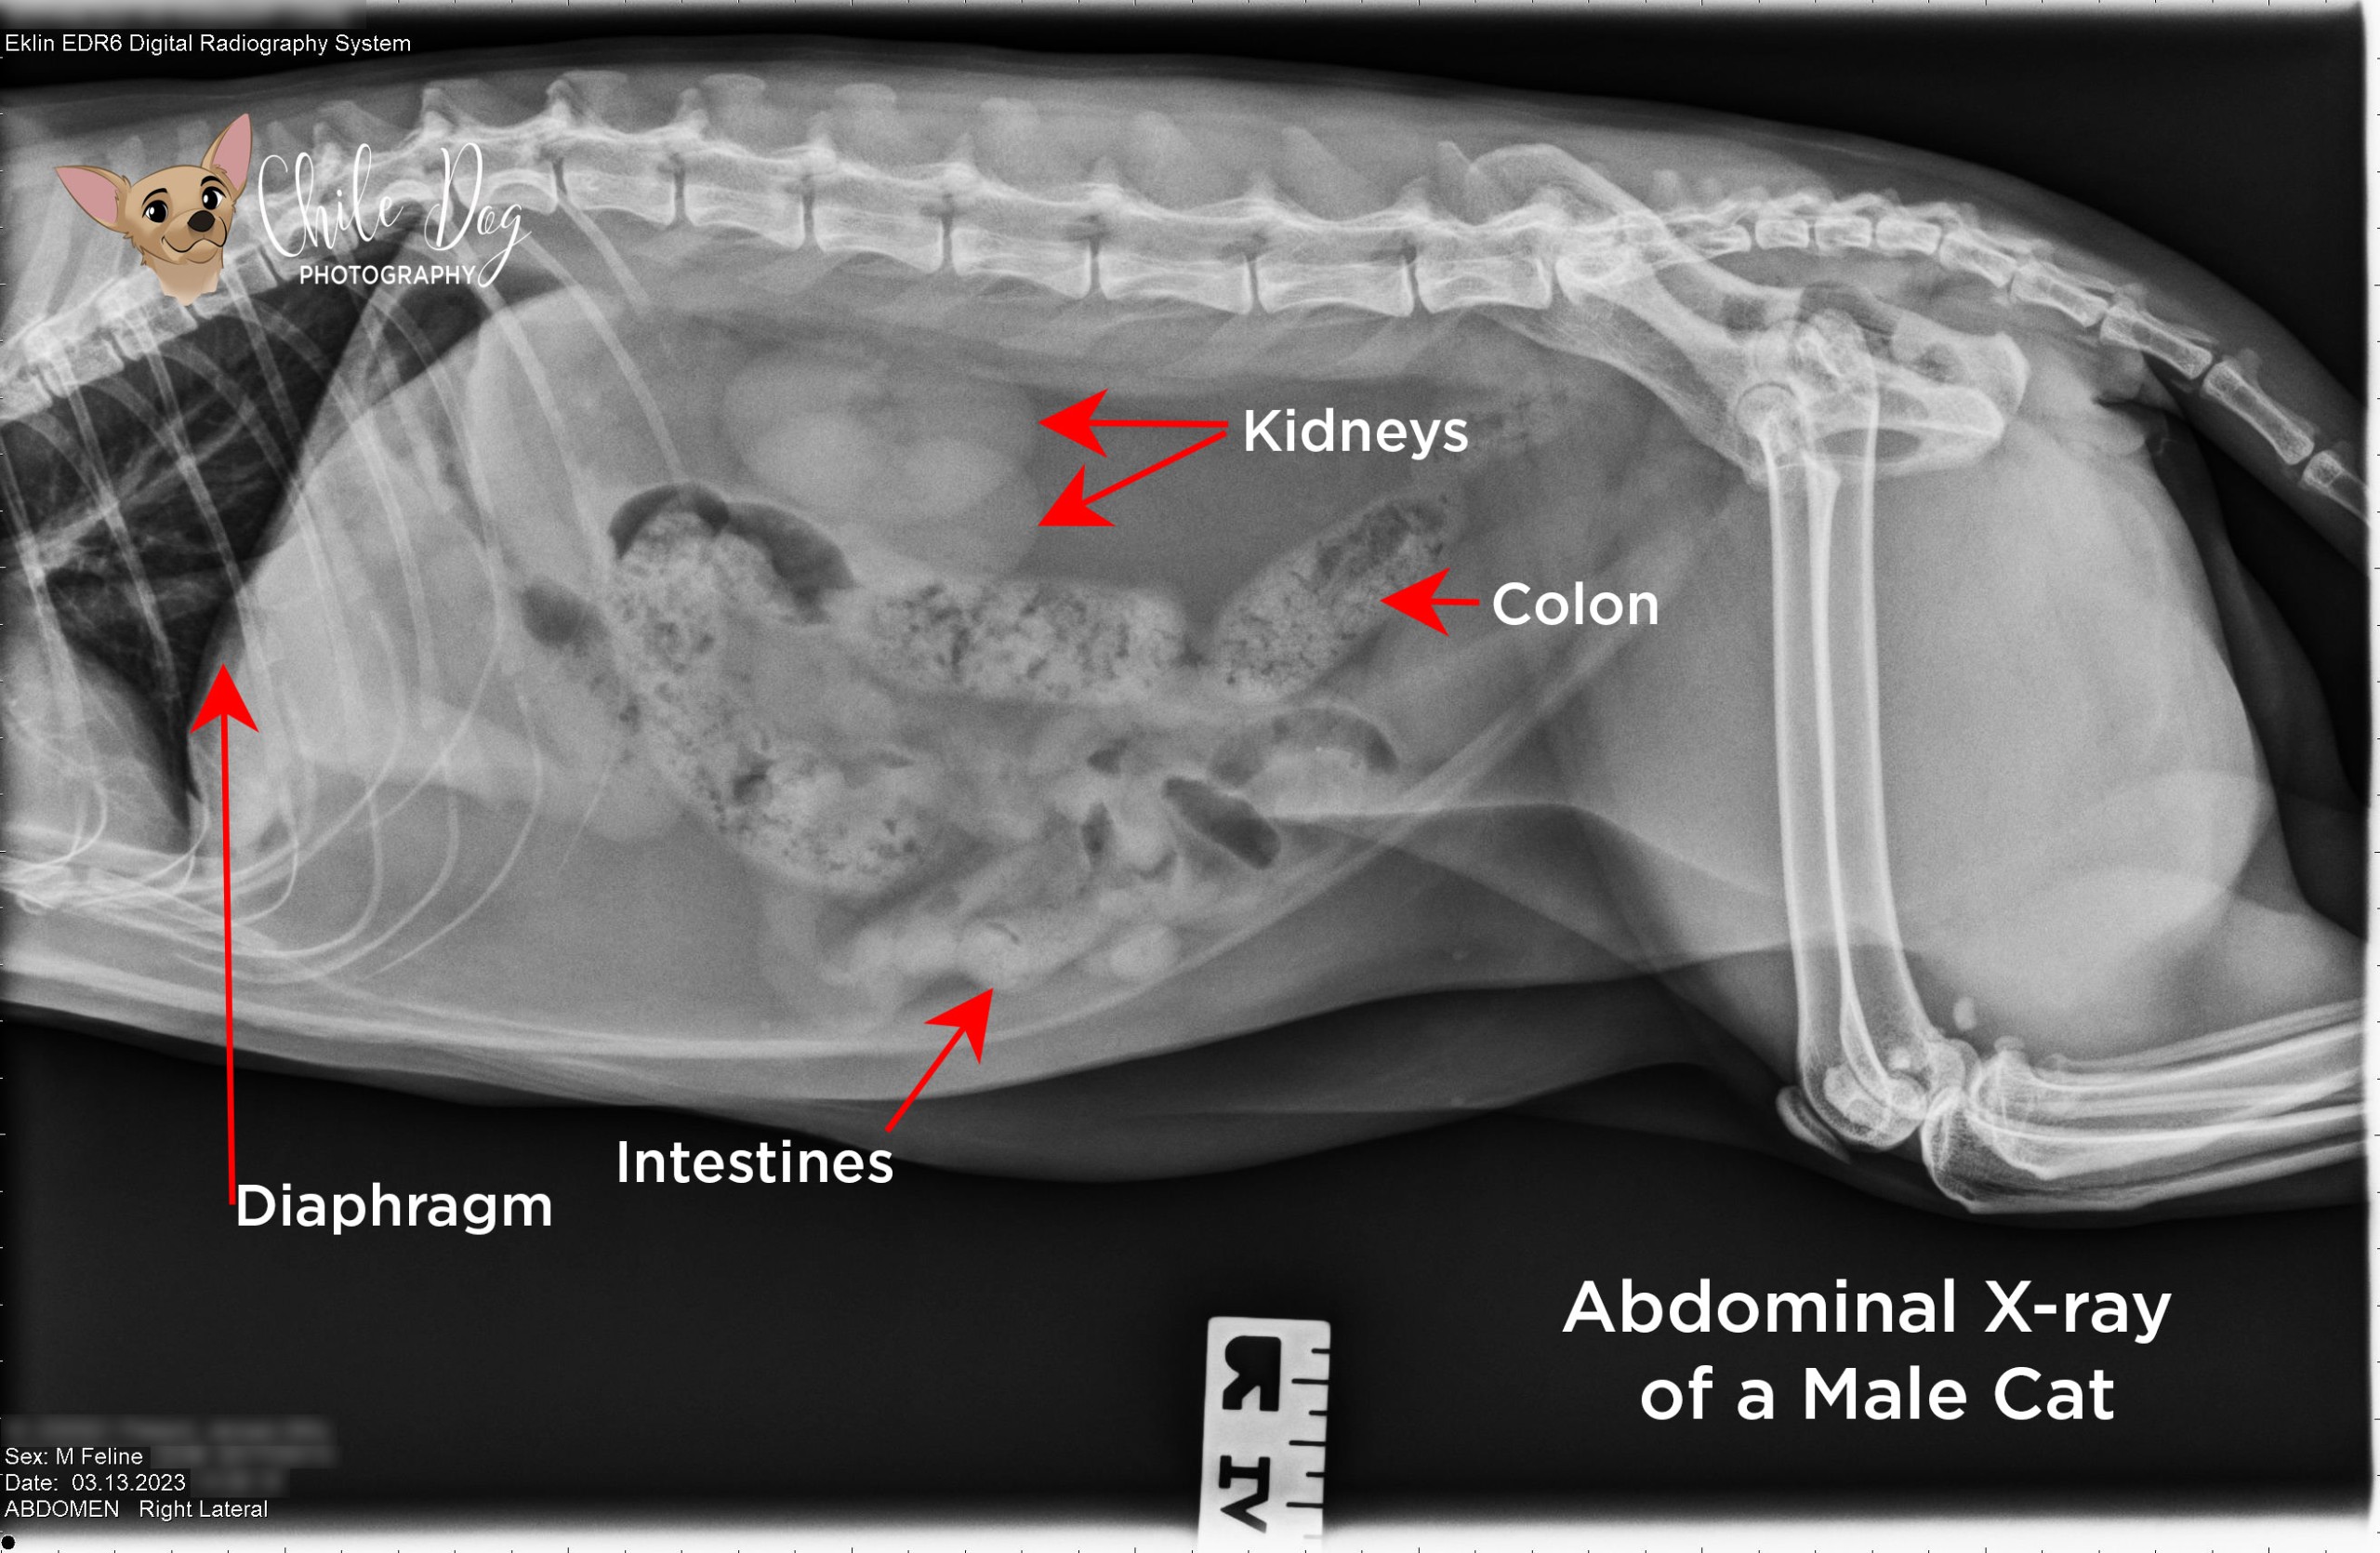 X-ray of the abdomen of a male cat showing the kidneys, intestines and bladder.